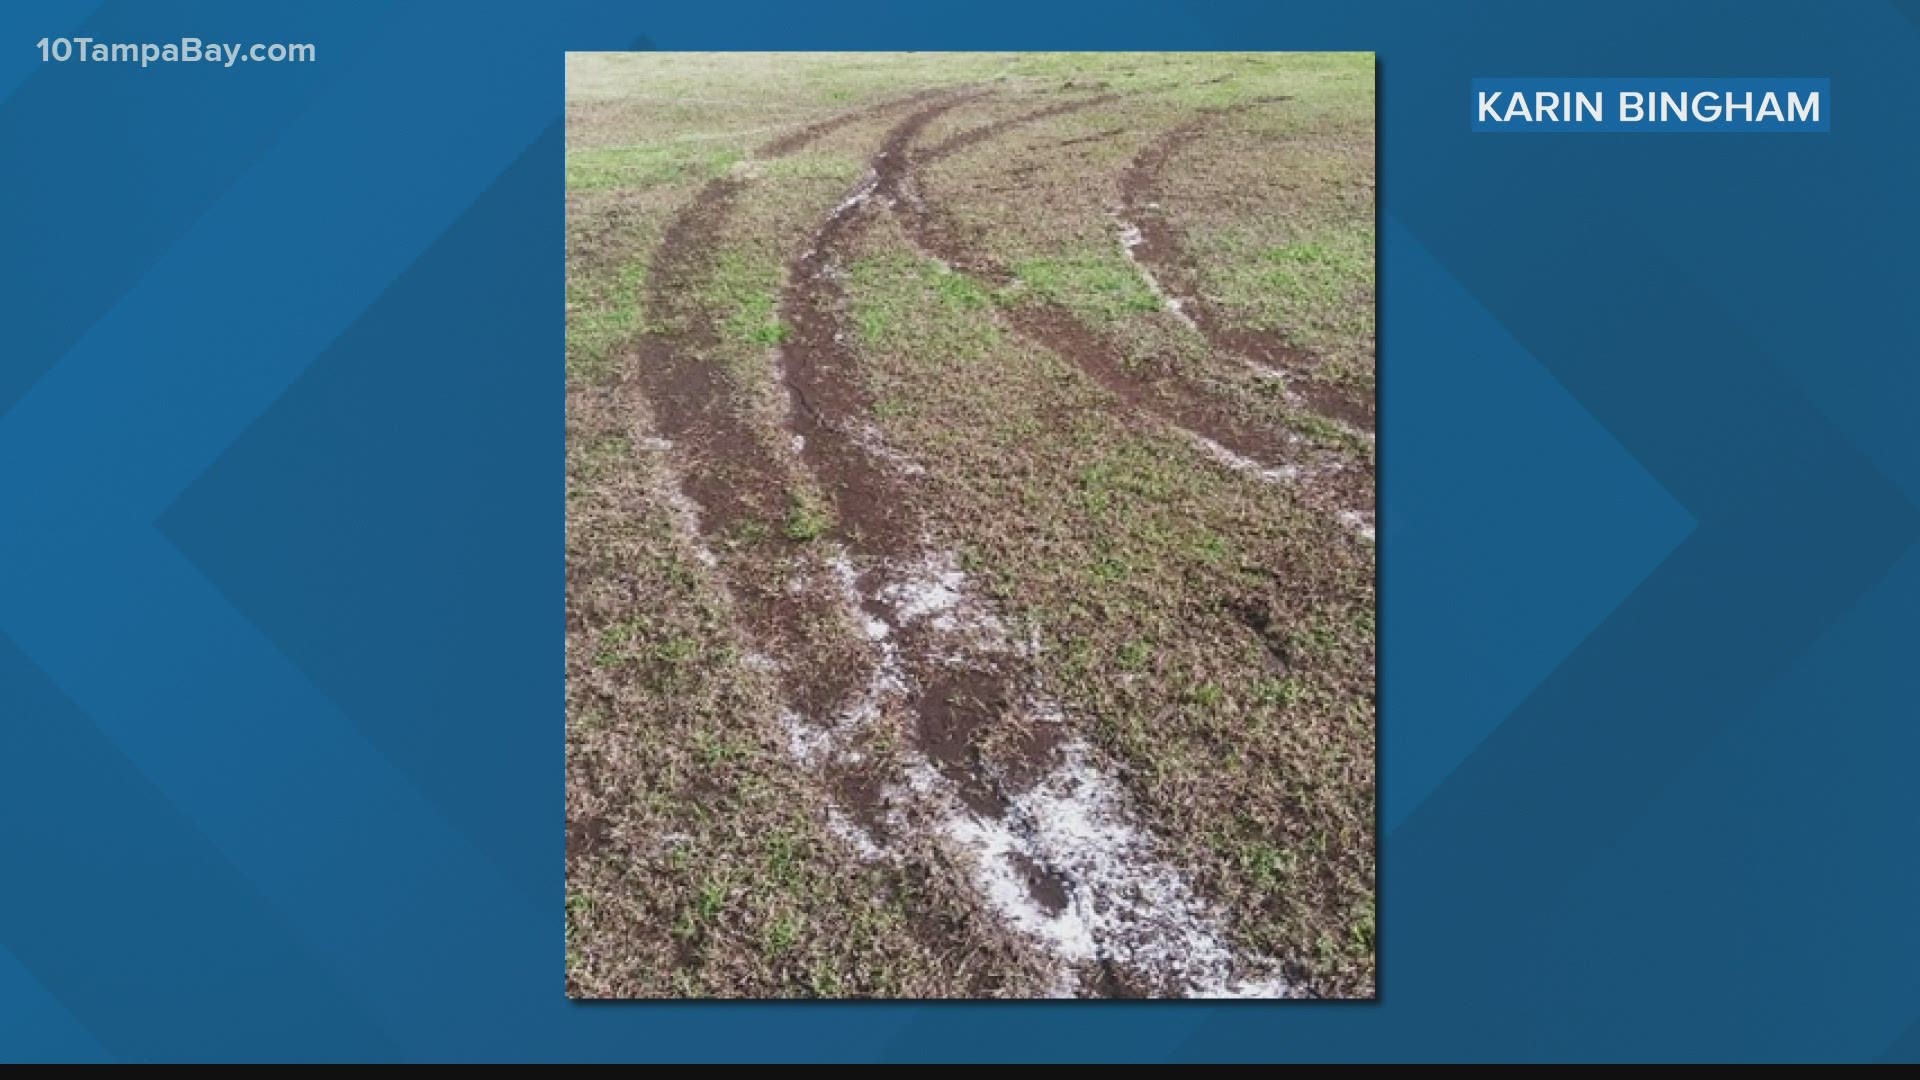 Organizers say it could take 4-6 months to repair the damaged field.